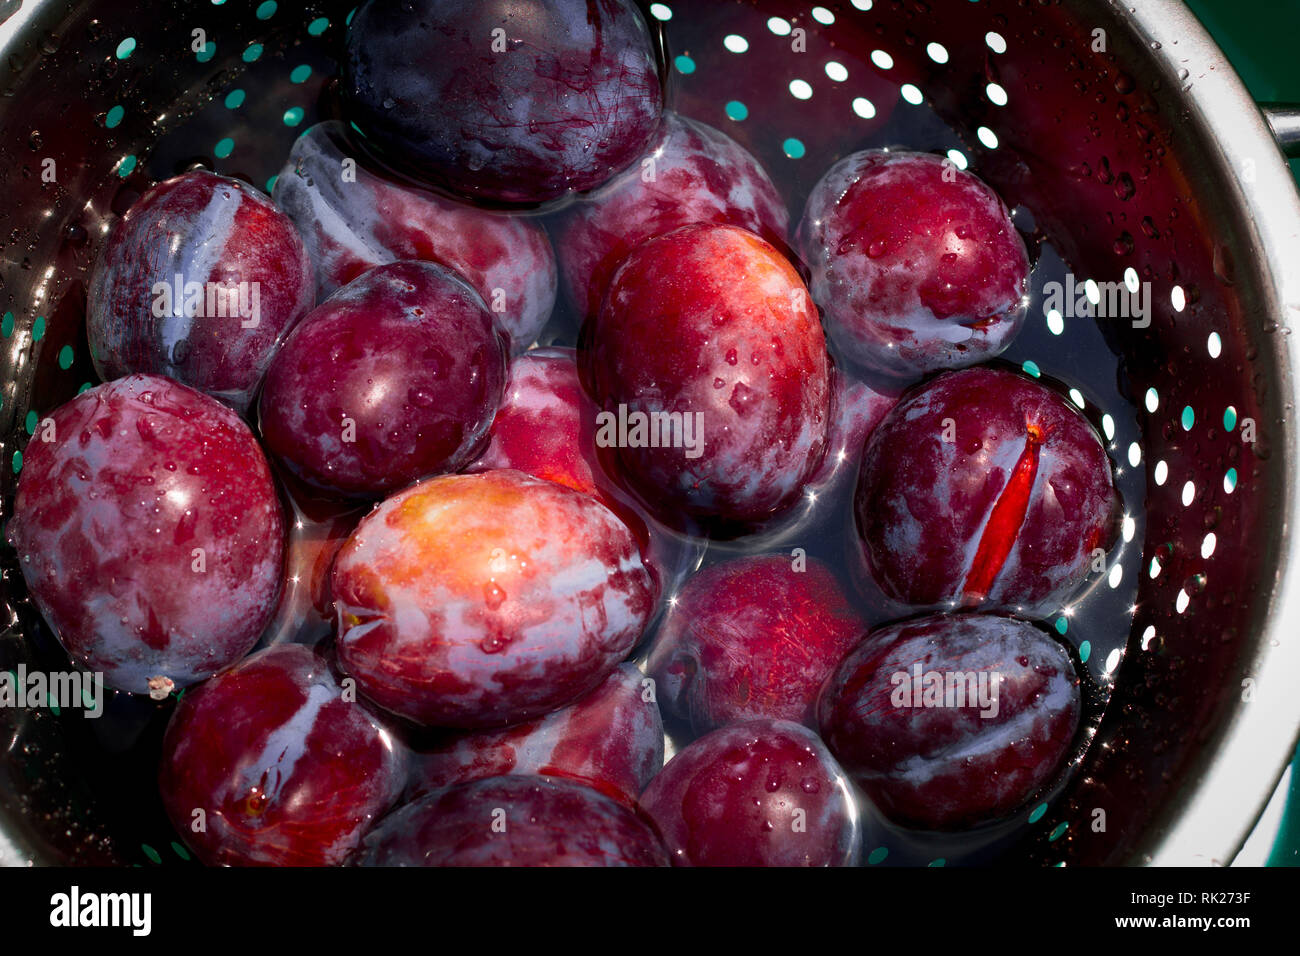 Colander with ripe juicy plums in female hands ,washing fruits before eating Stock Photo